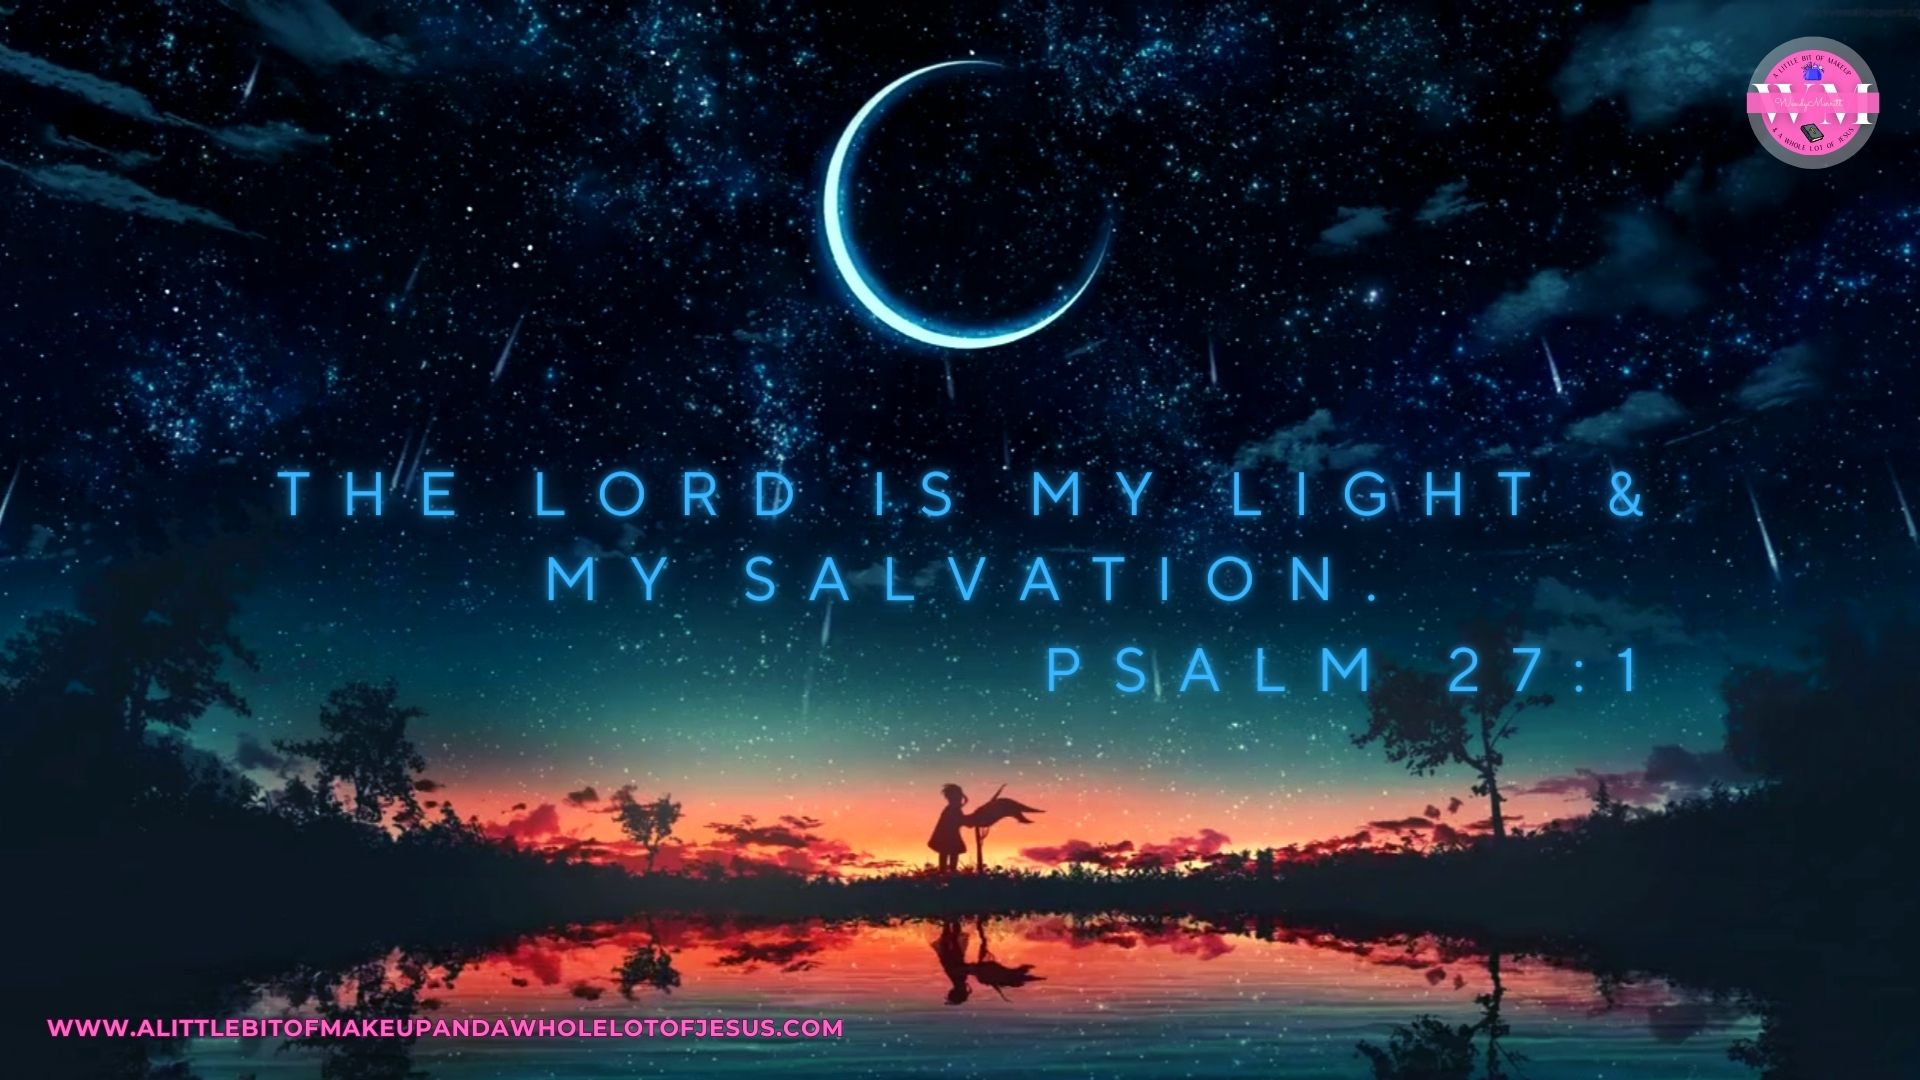 The LORD is my light & my salvation.  Psalm 27:1 Season 1: Episode 33